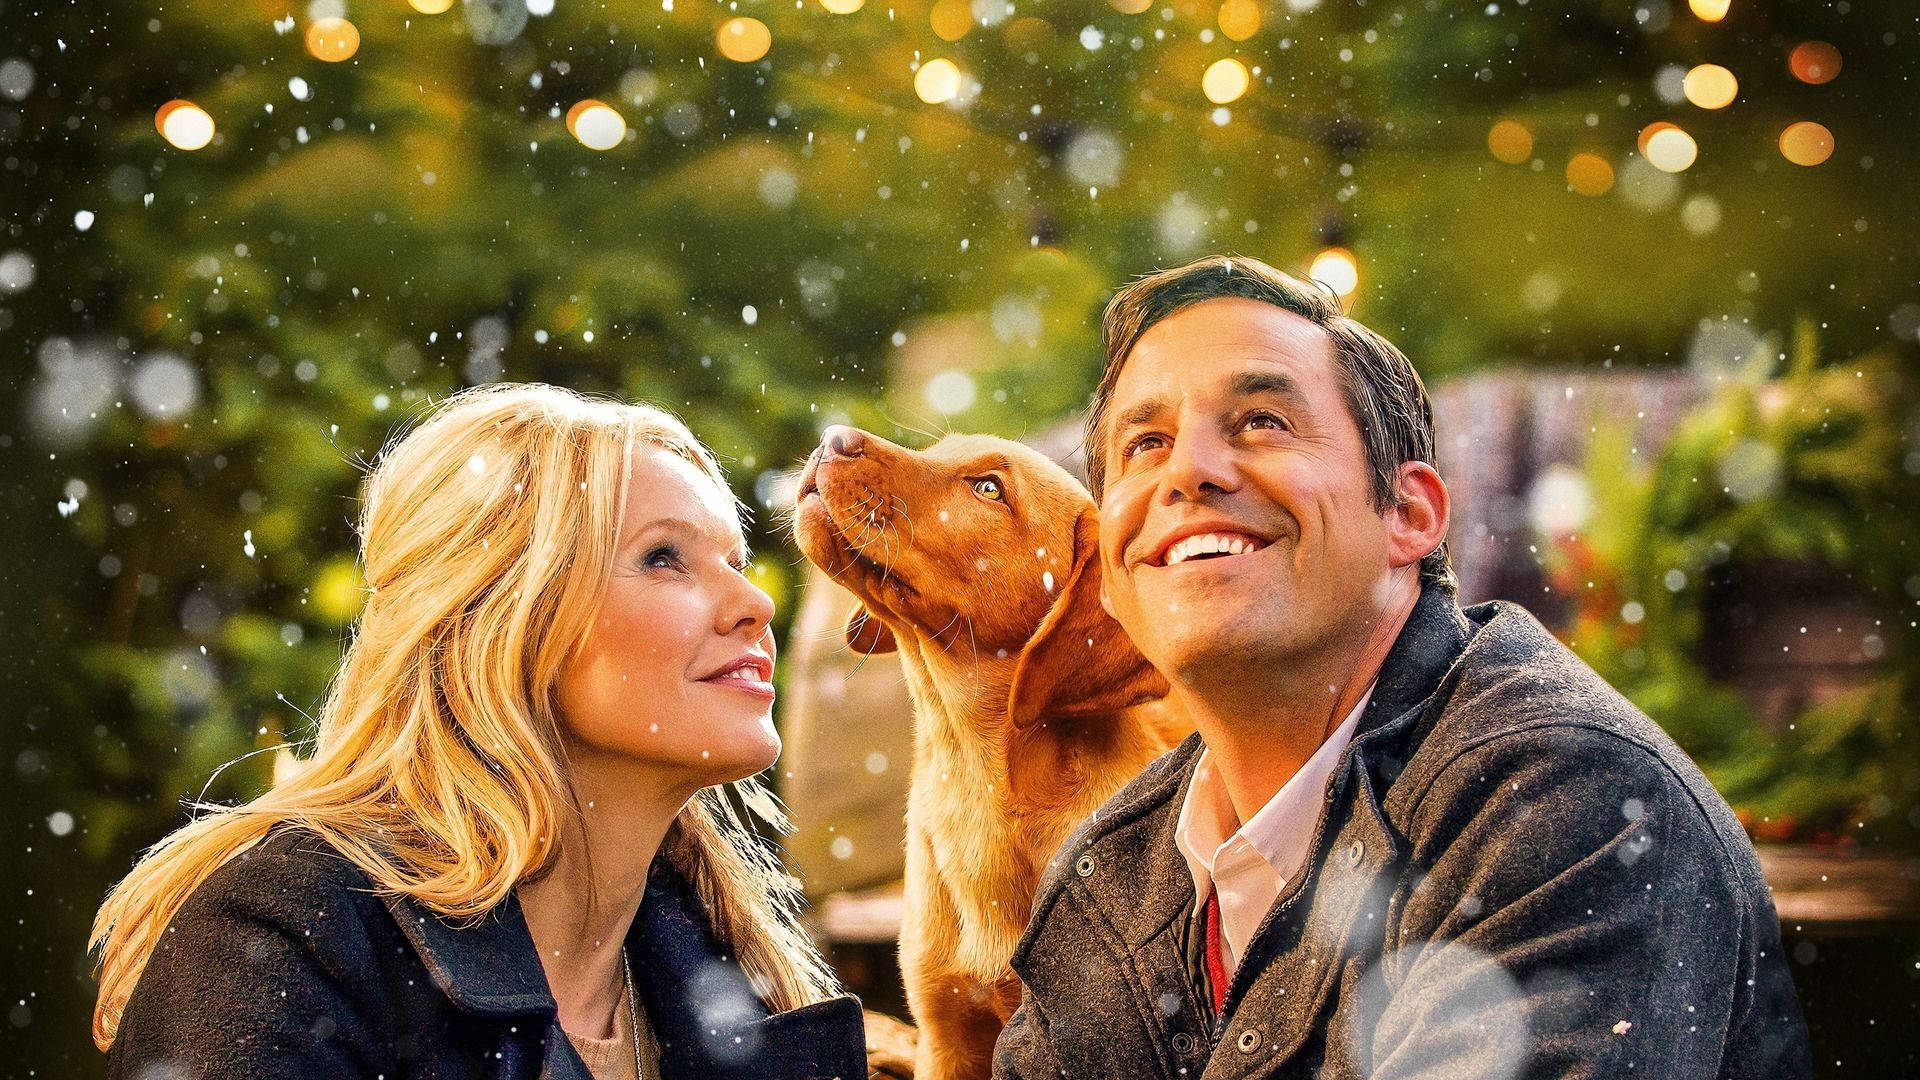 Nicholas Brendon In A Golden Christmas Background